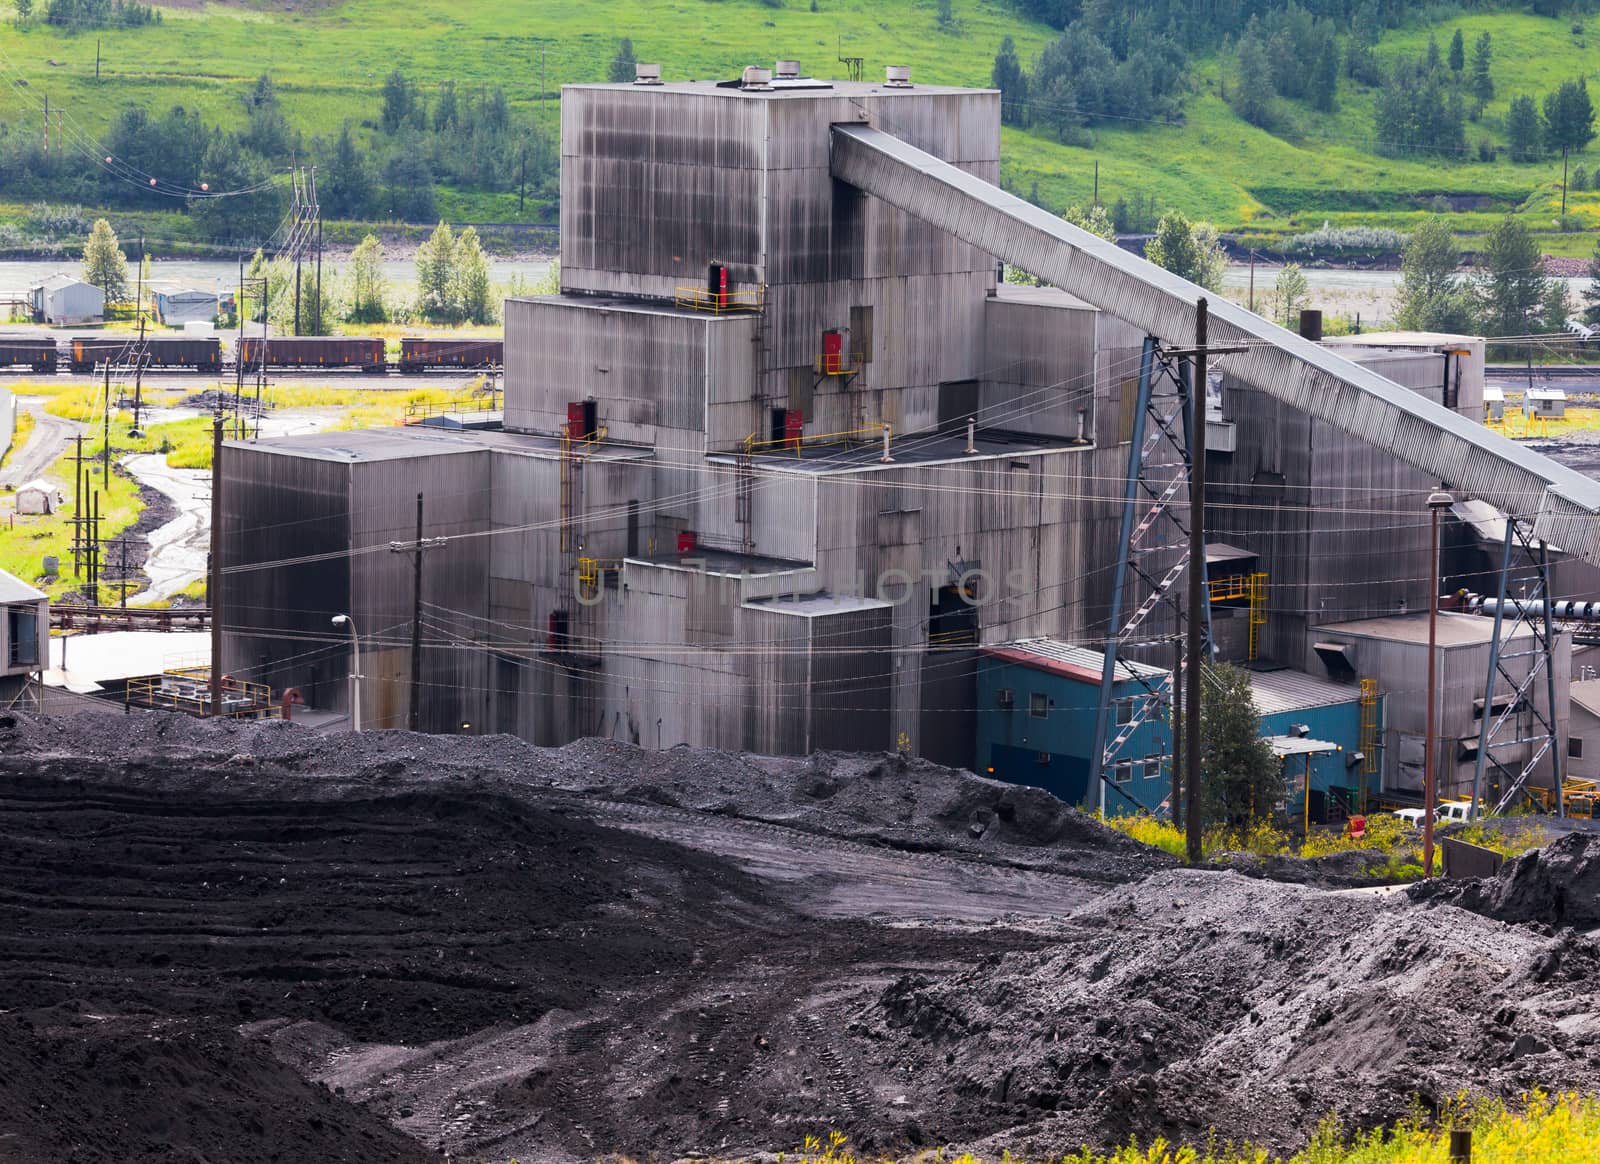 Dirty coal mine building fossil energy resource by PiLens